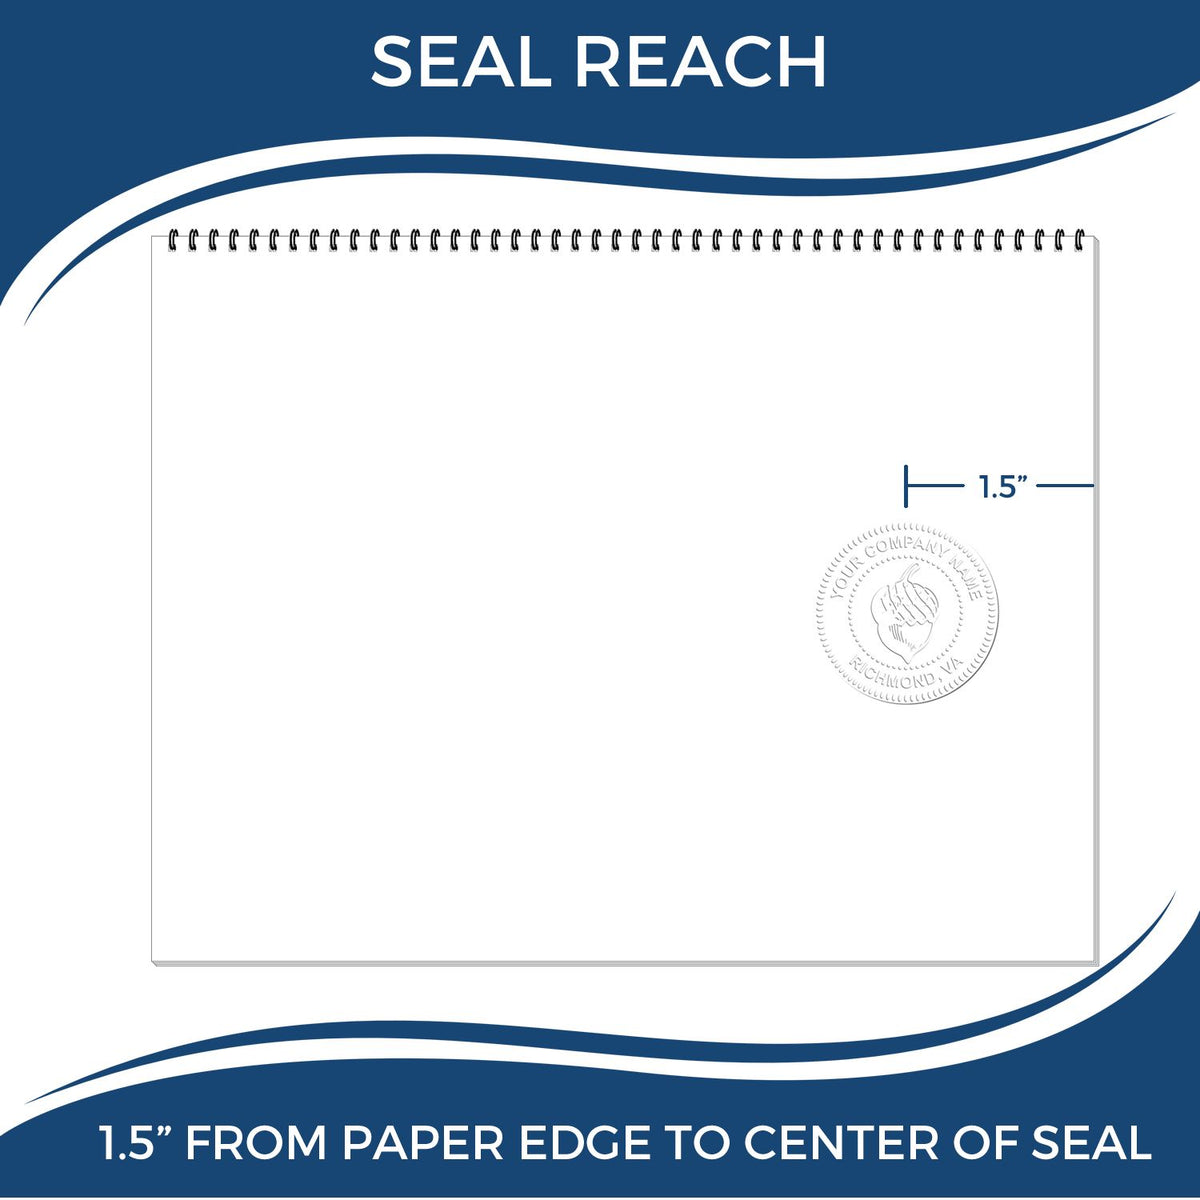 An infographic showing the seal reach which is represented by a ruler and a miniature seal image of the Handheld Indiana Architect Seal Embosser